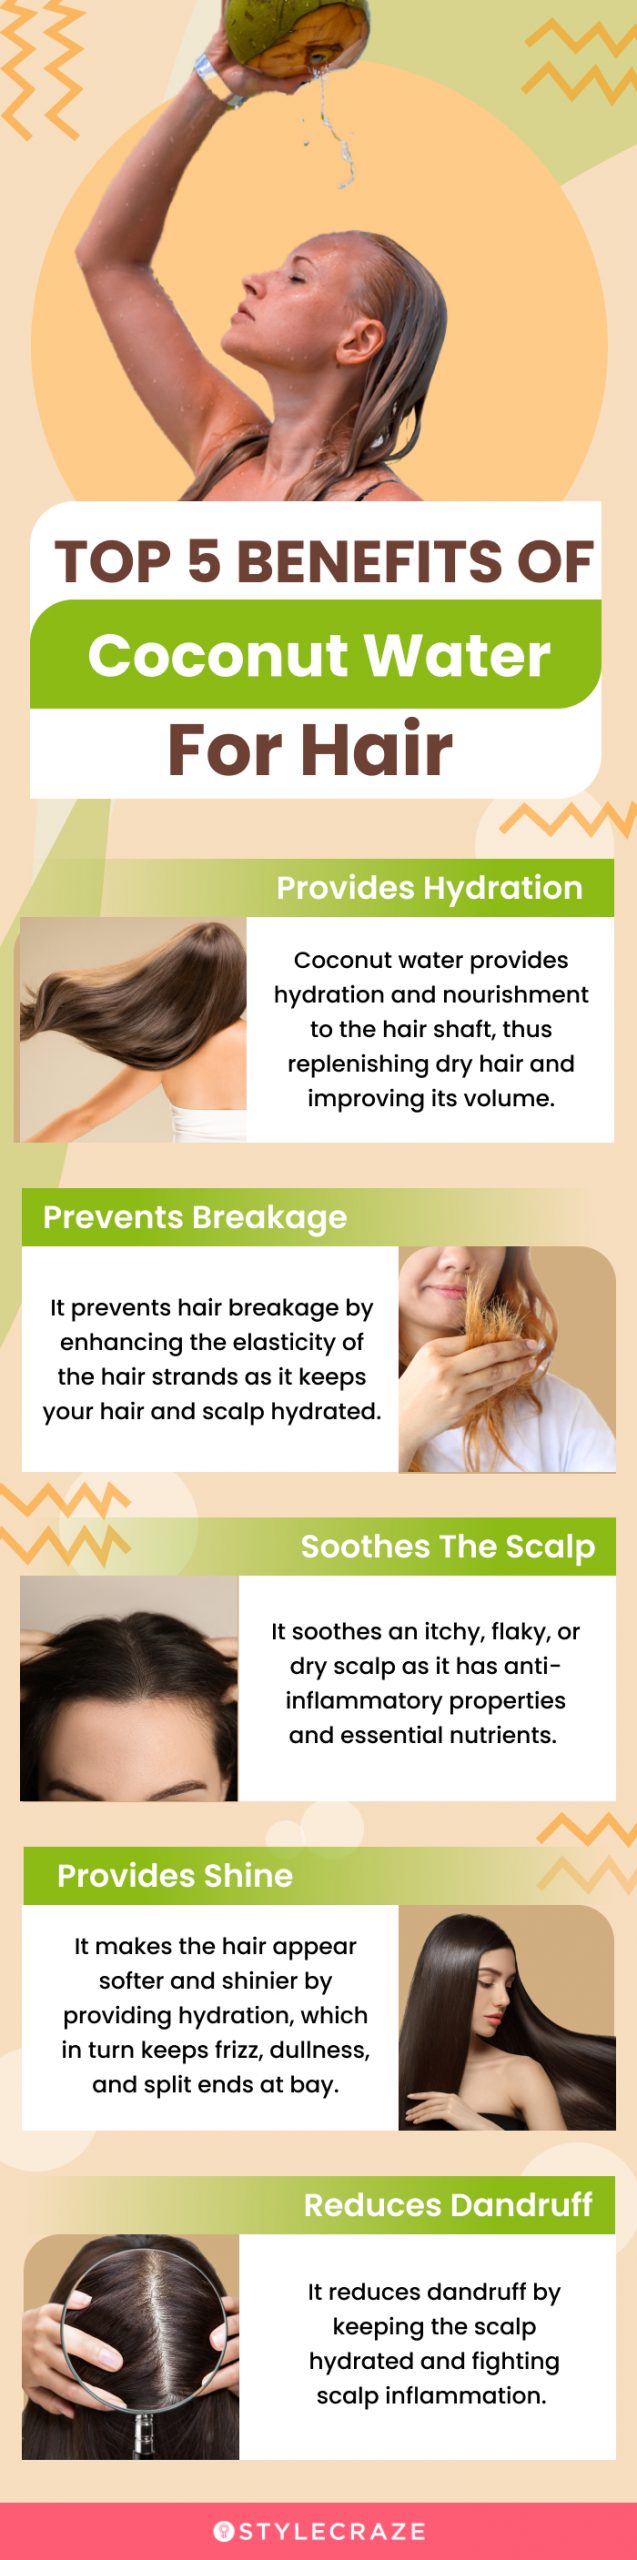 top 5 benefits of coconut water for hair (infographic)